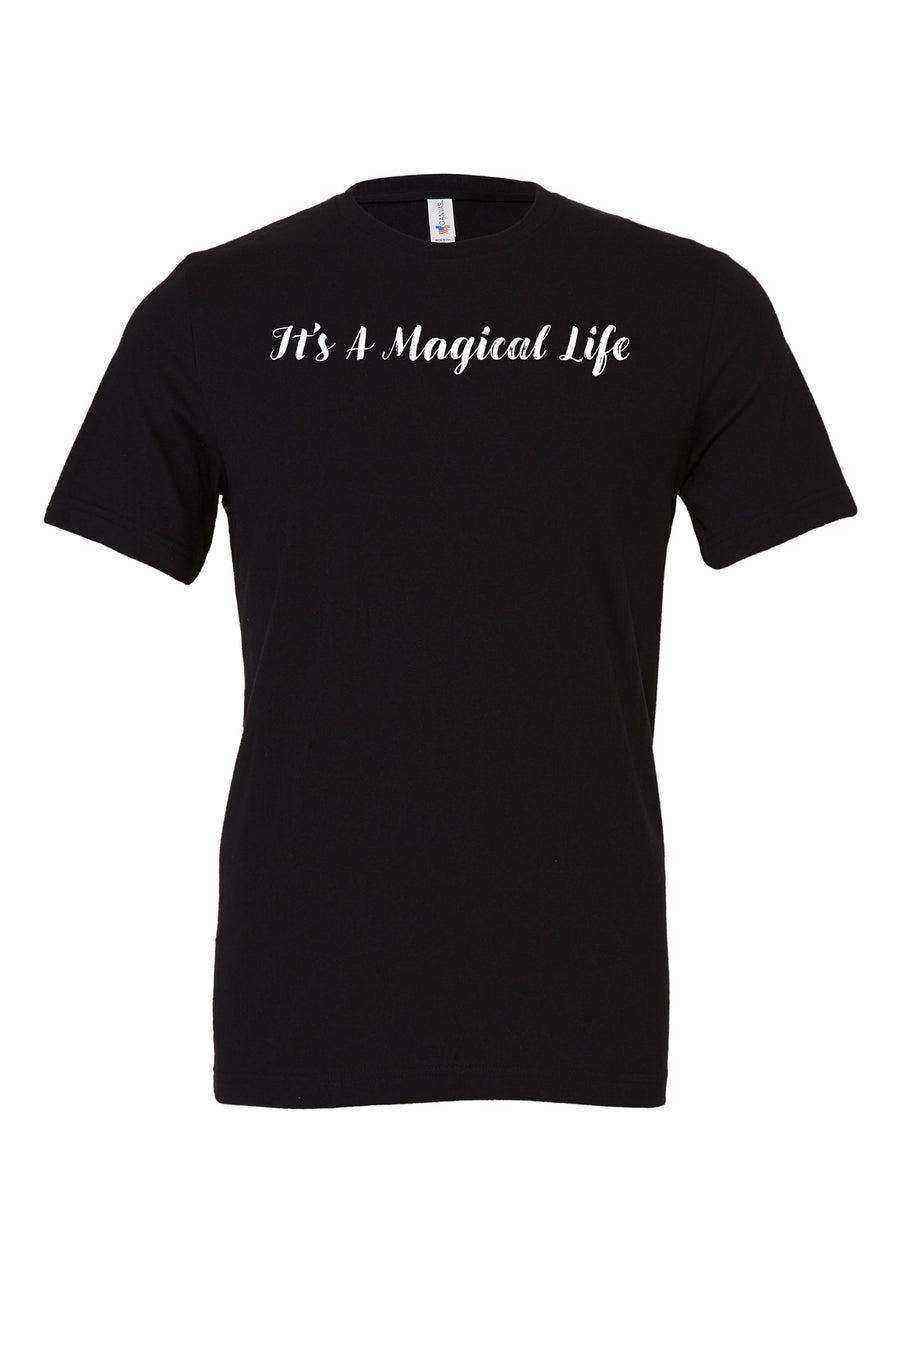 It's A Magical Life Shirt - Dylan's Tees